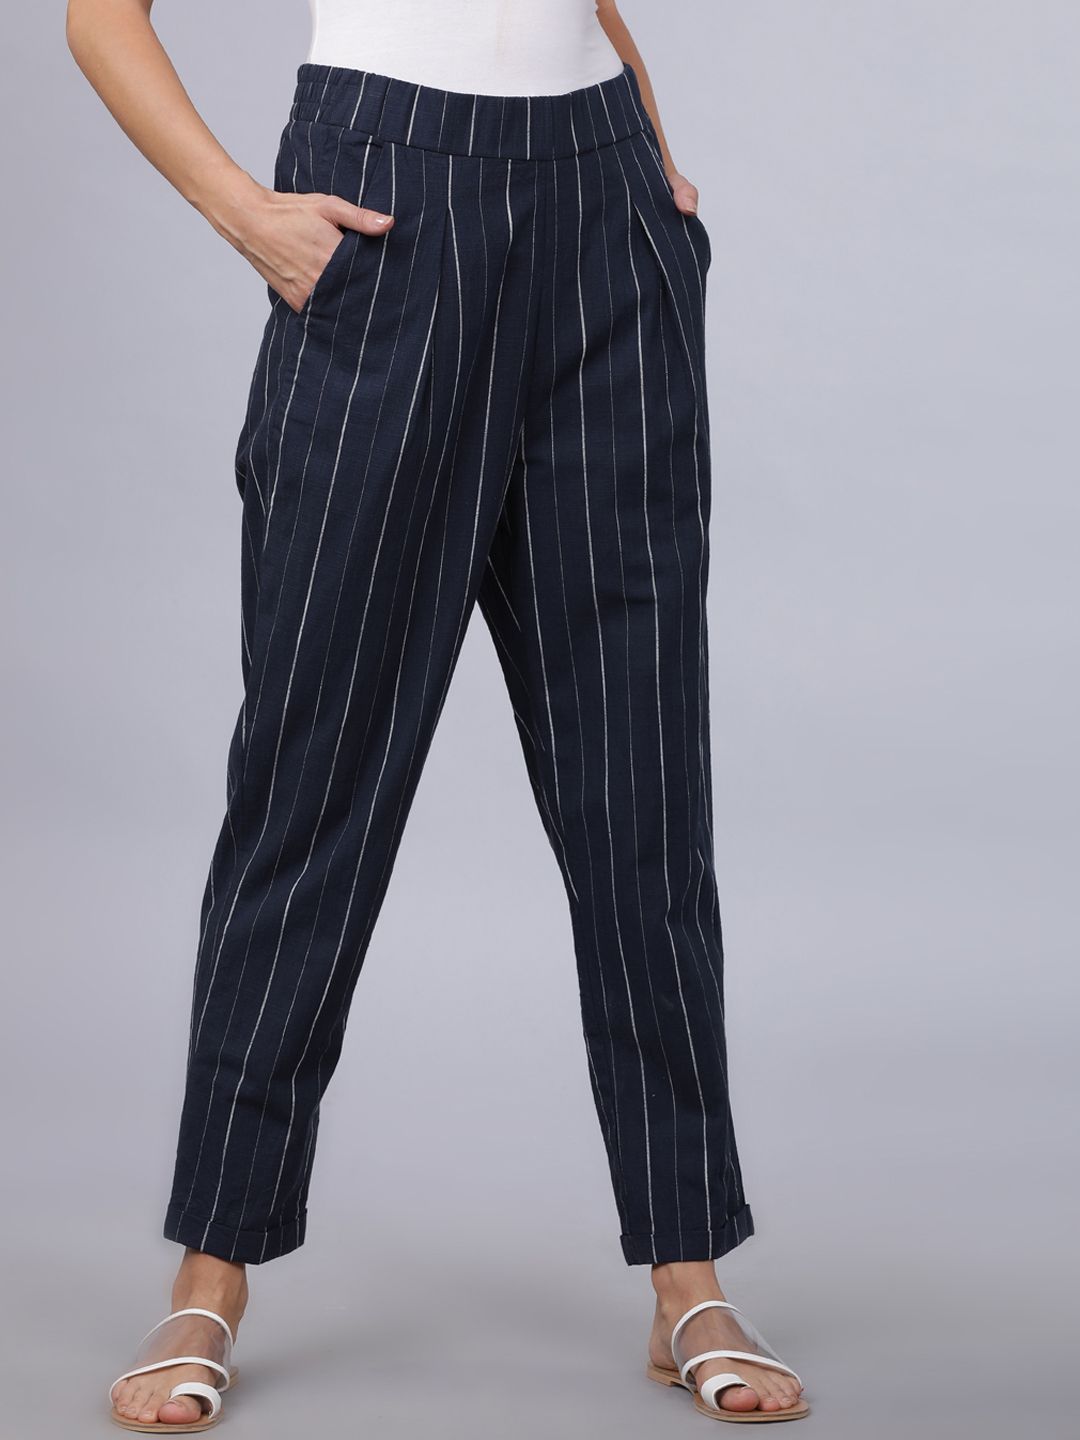 Tokyo Talkies Women Navy Blue & White Regular Fit Striped Trousers Price in India